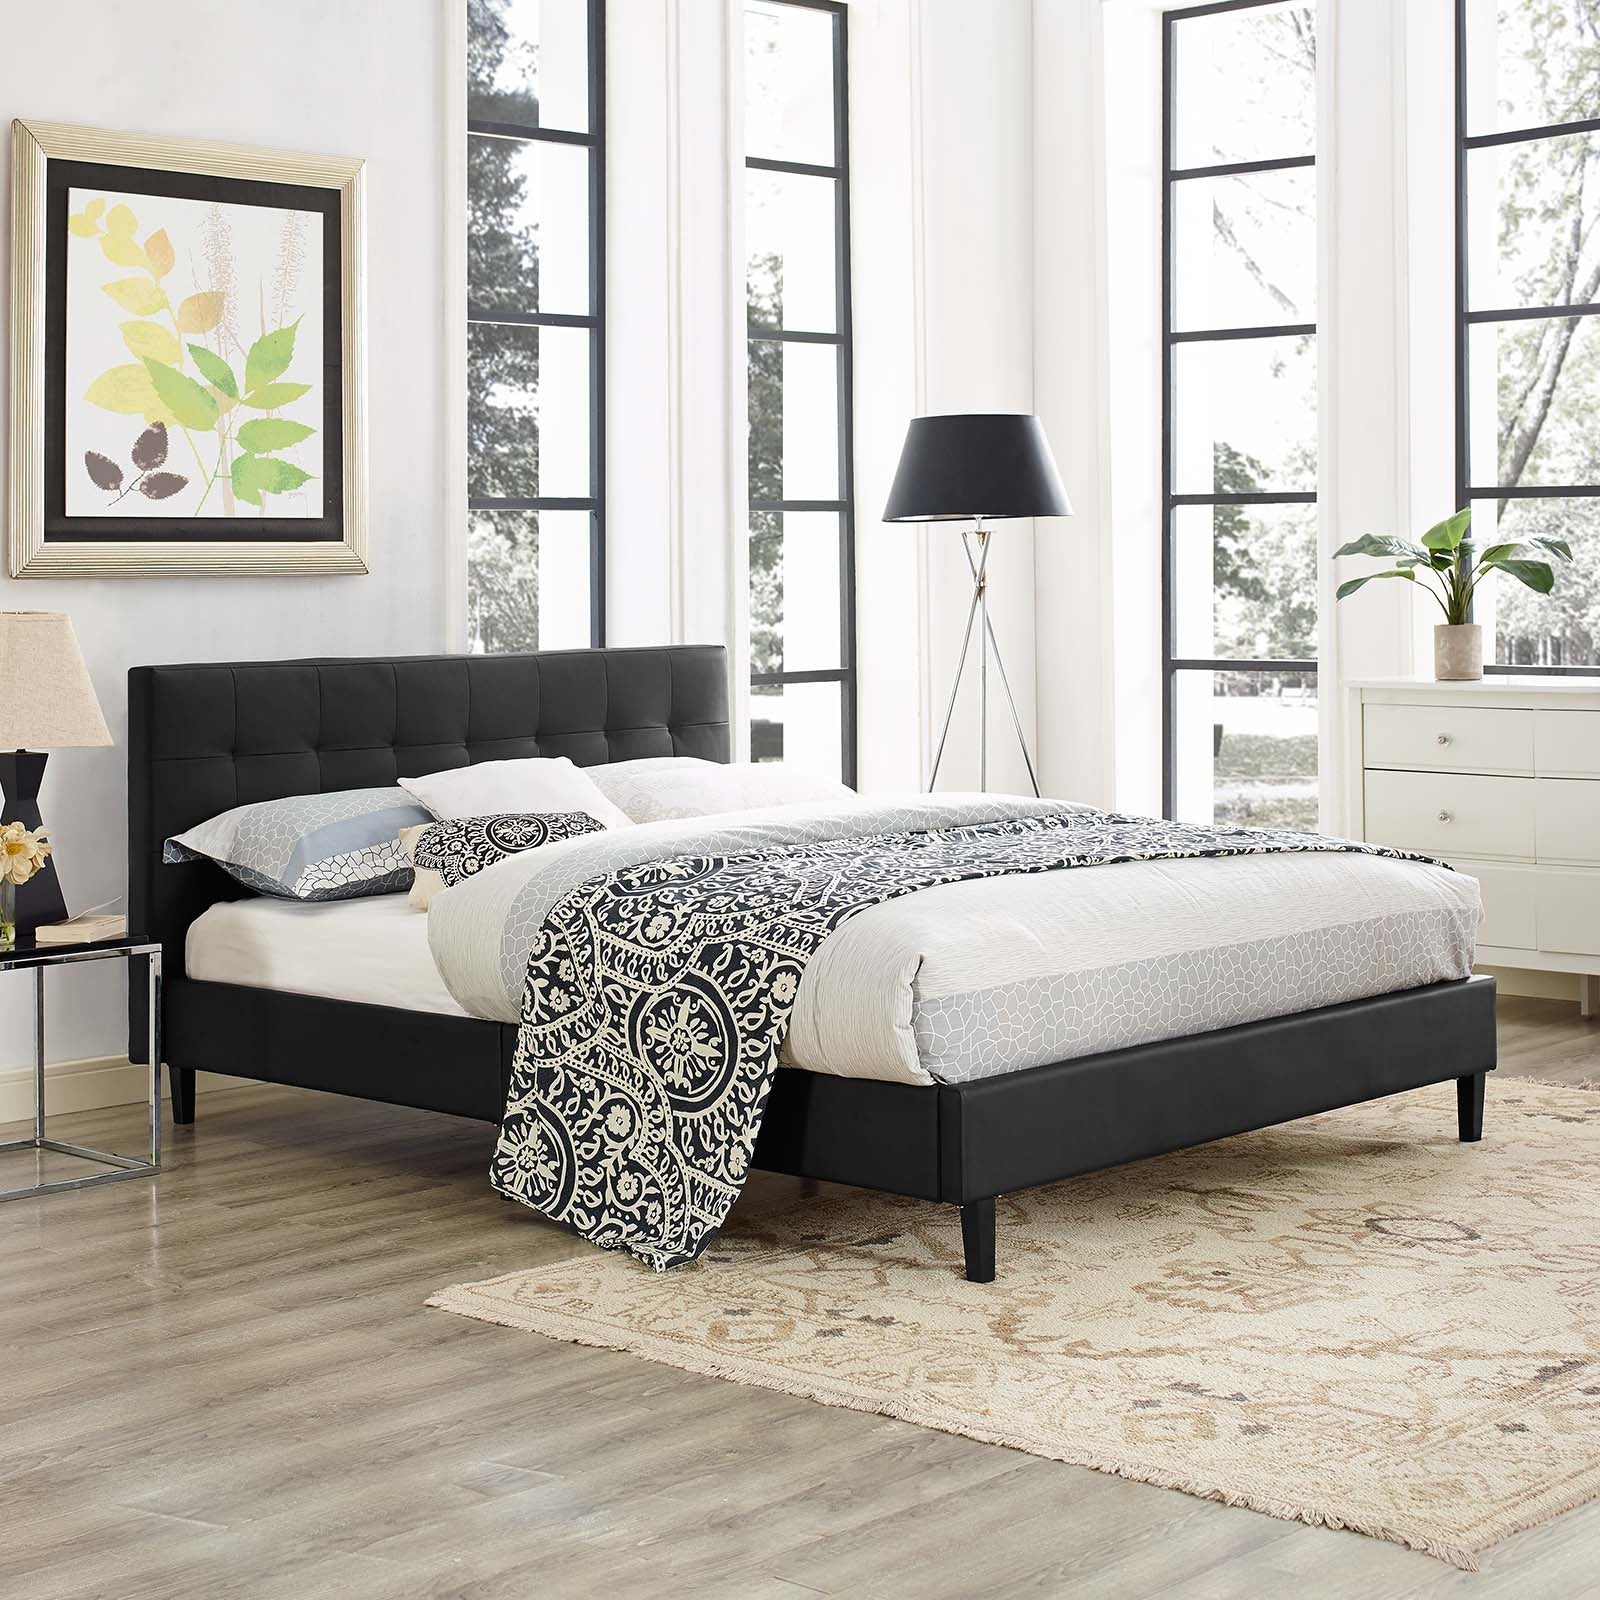 Modway Beds - Linnea Full Faux Leather Bed Black